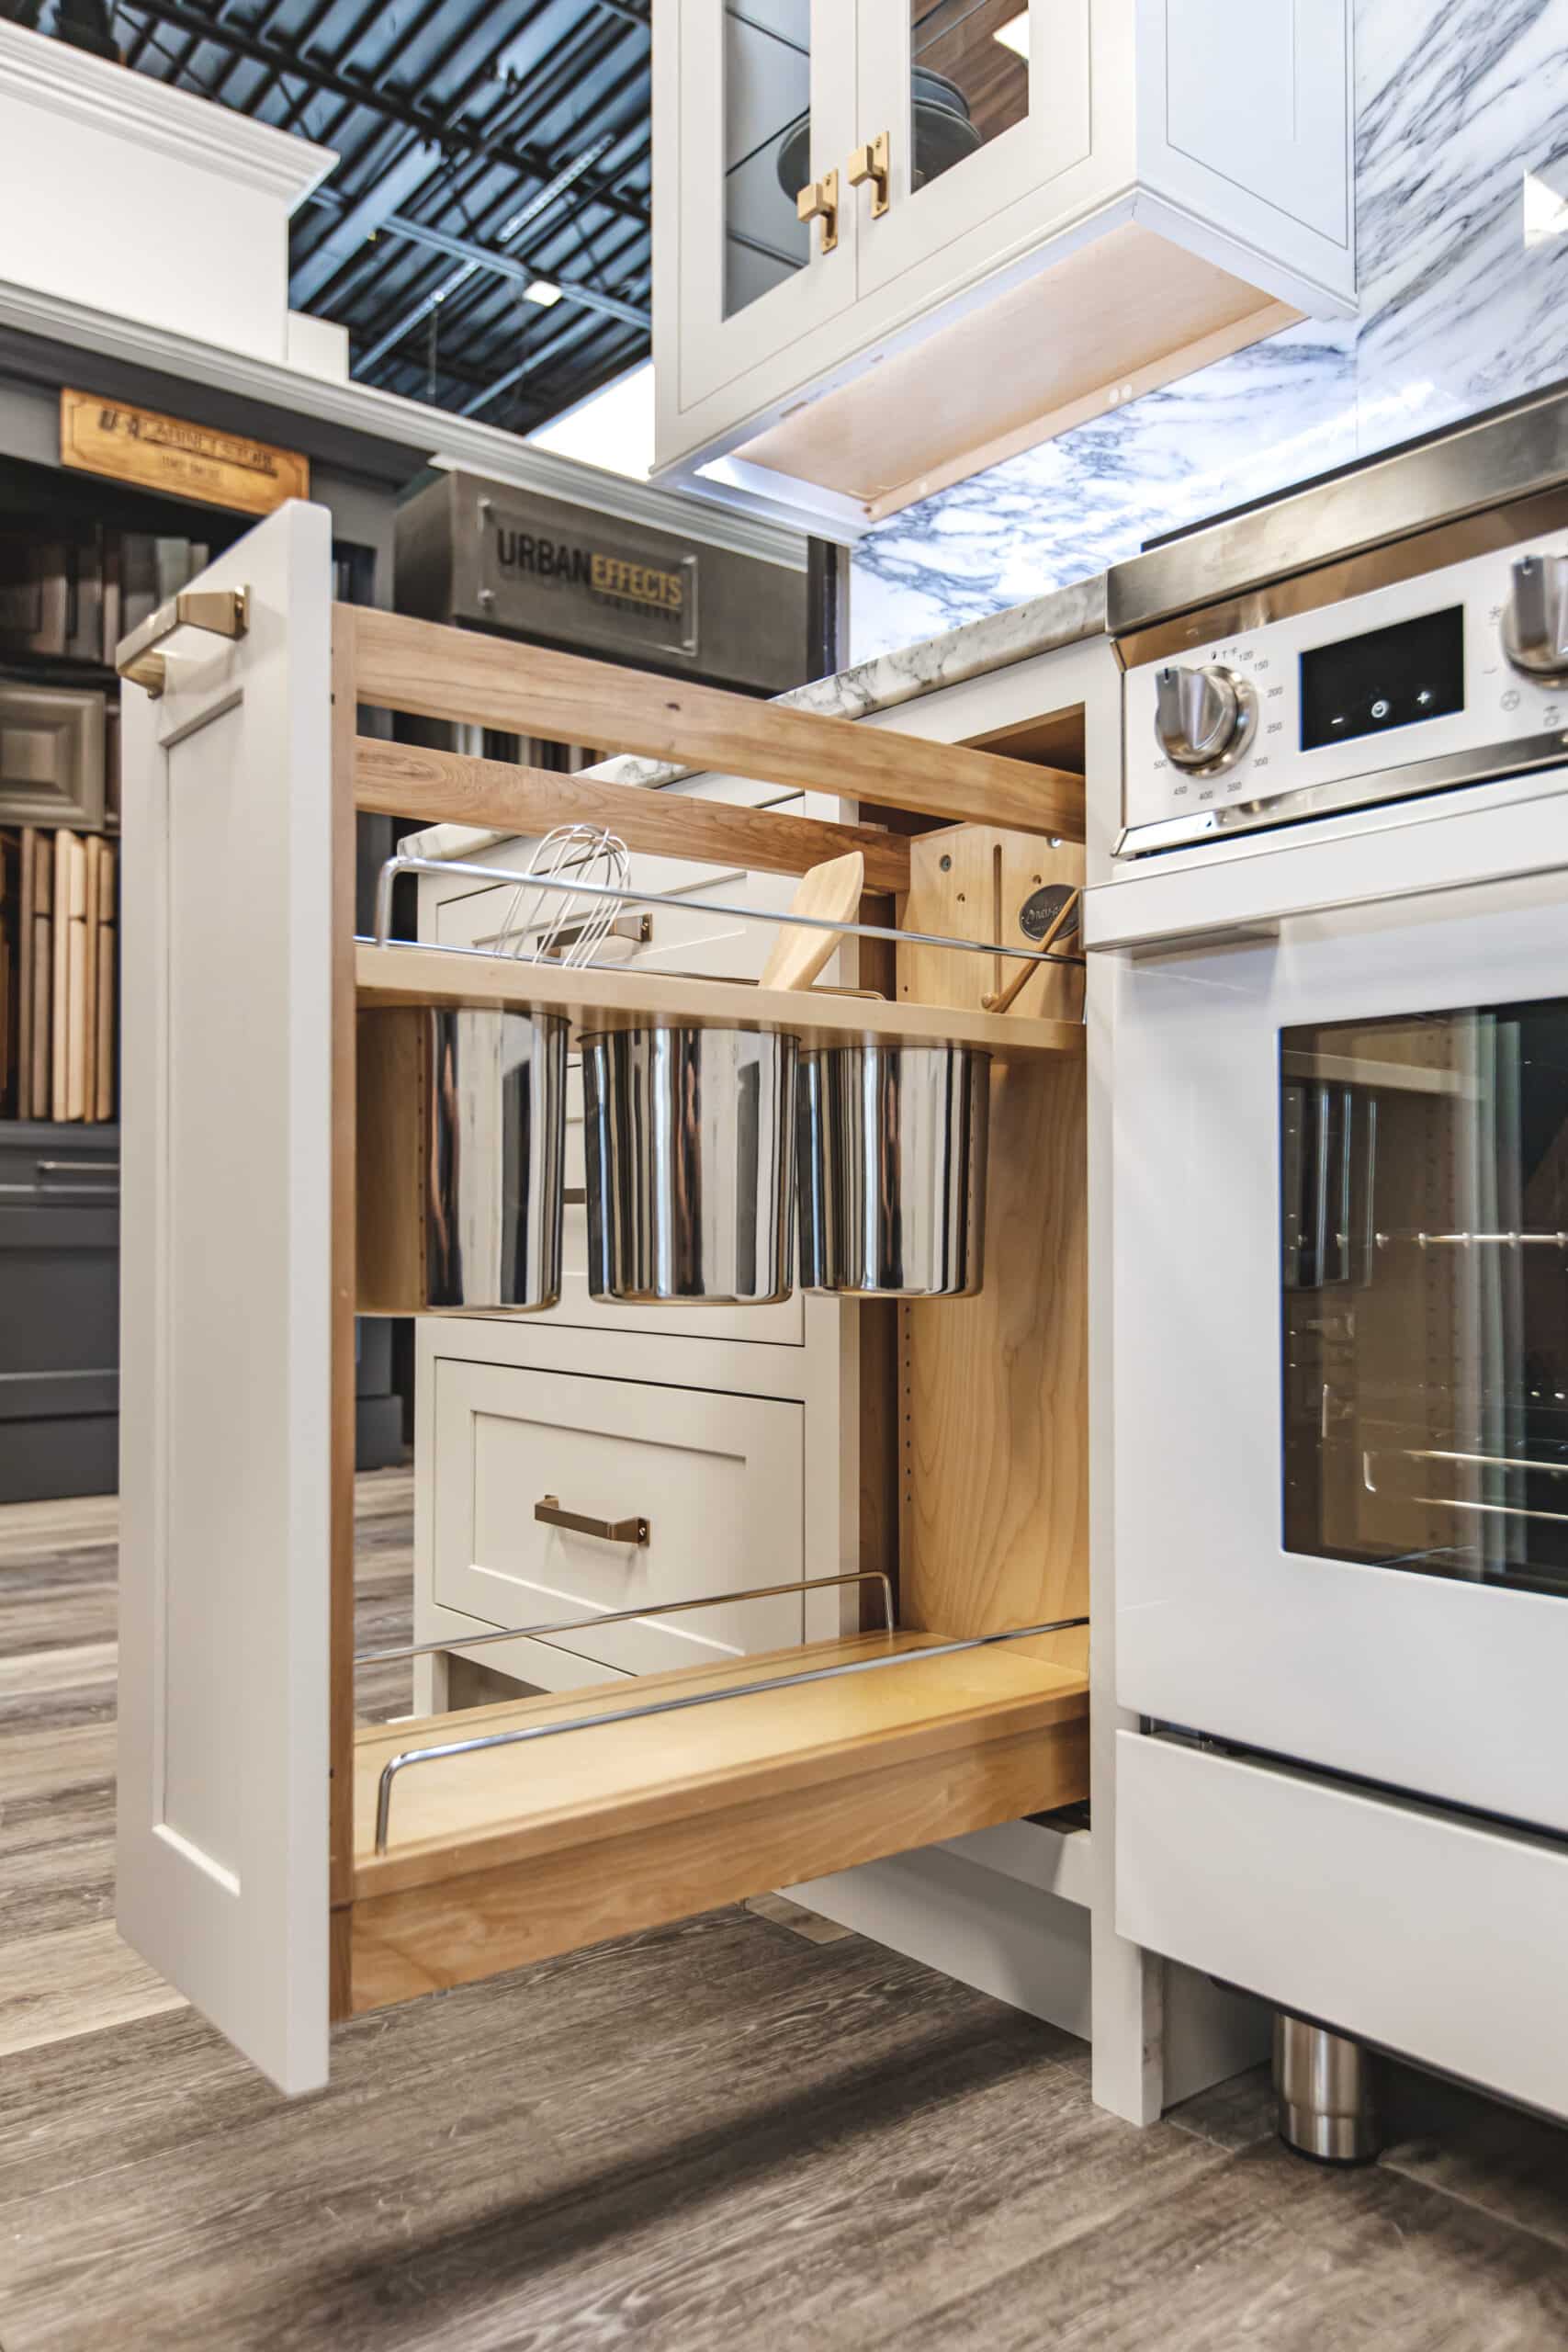 A kitchen with a pull-out drawer and a stove